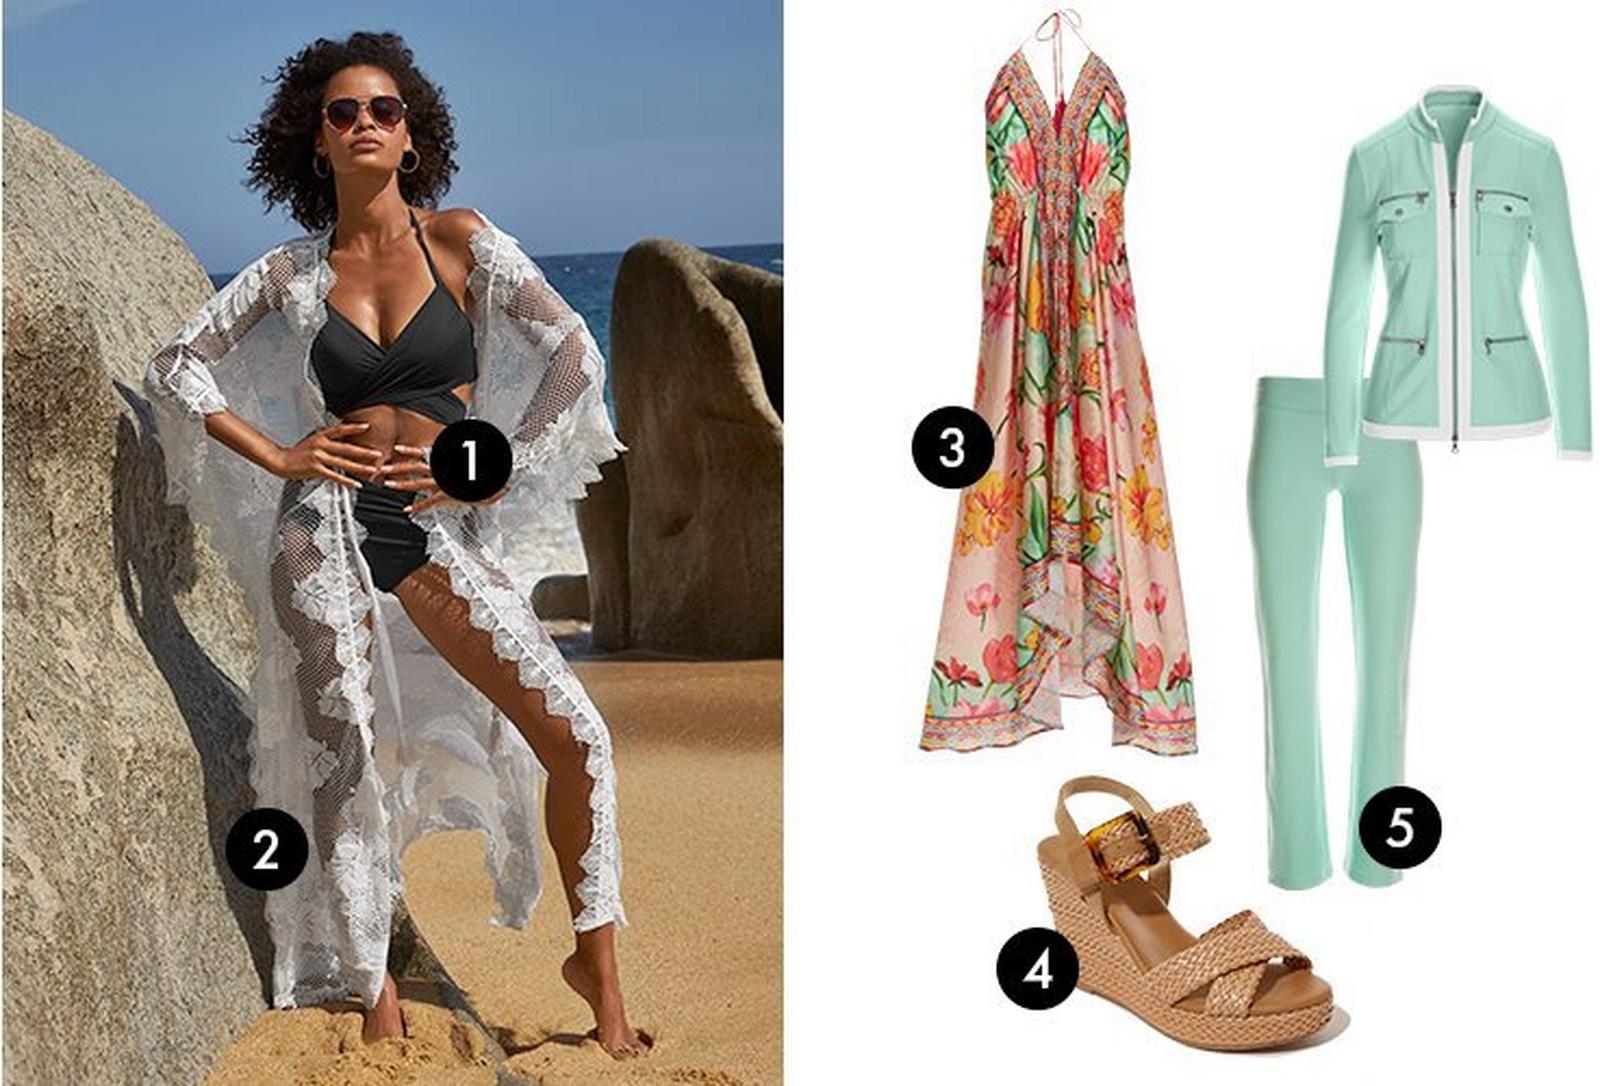 left model wearing a black bikini, white lace duster cover-up, and sunglasses. right panel shows a multicolored printed halter maxi dress, light blue two-piece chic coordinate set, and tan wedges.